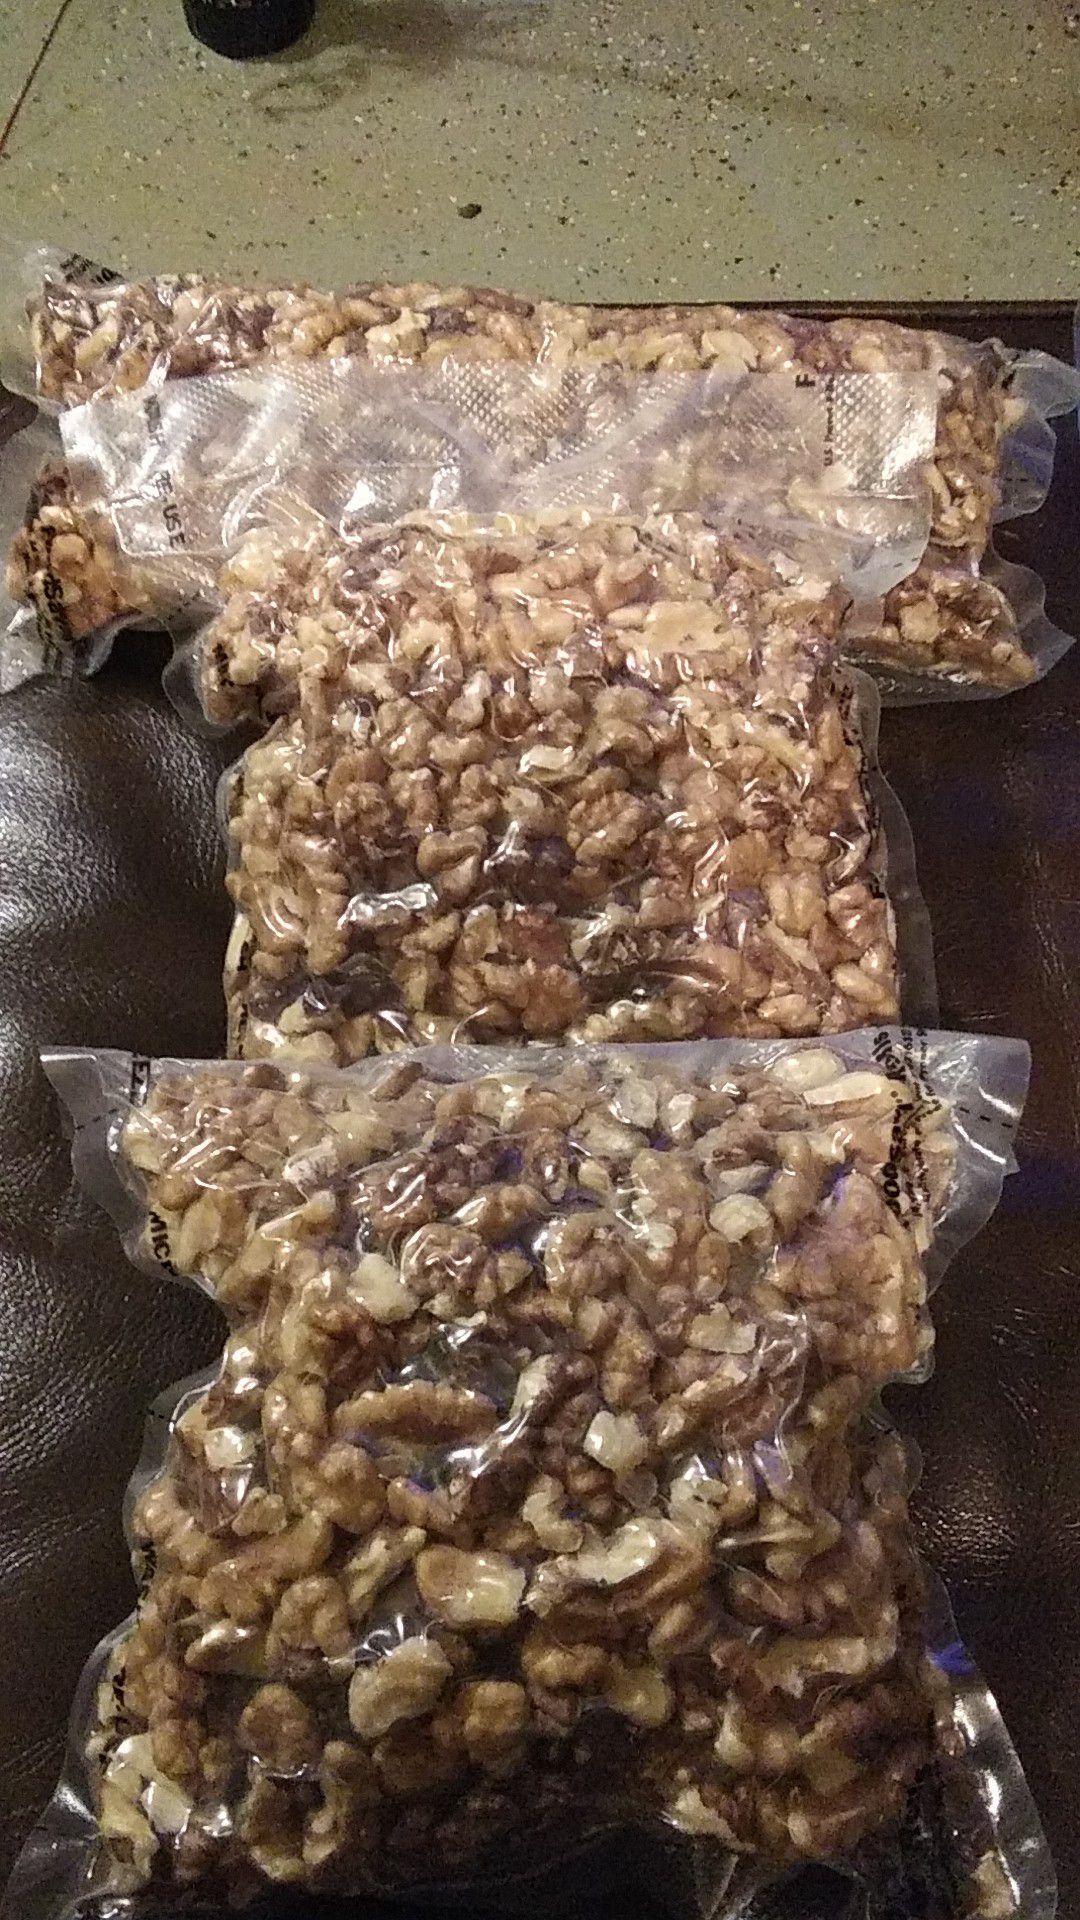 English walnuts. Sold in freezer bags, in 1 pound or 1/2 lb bags.